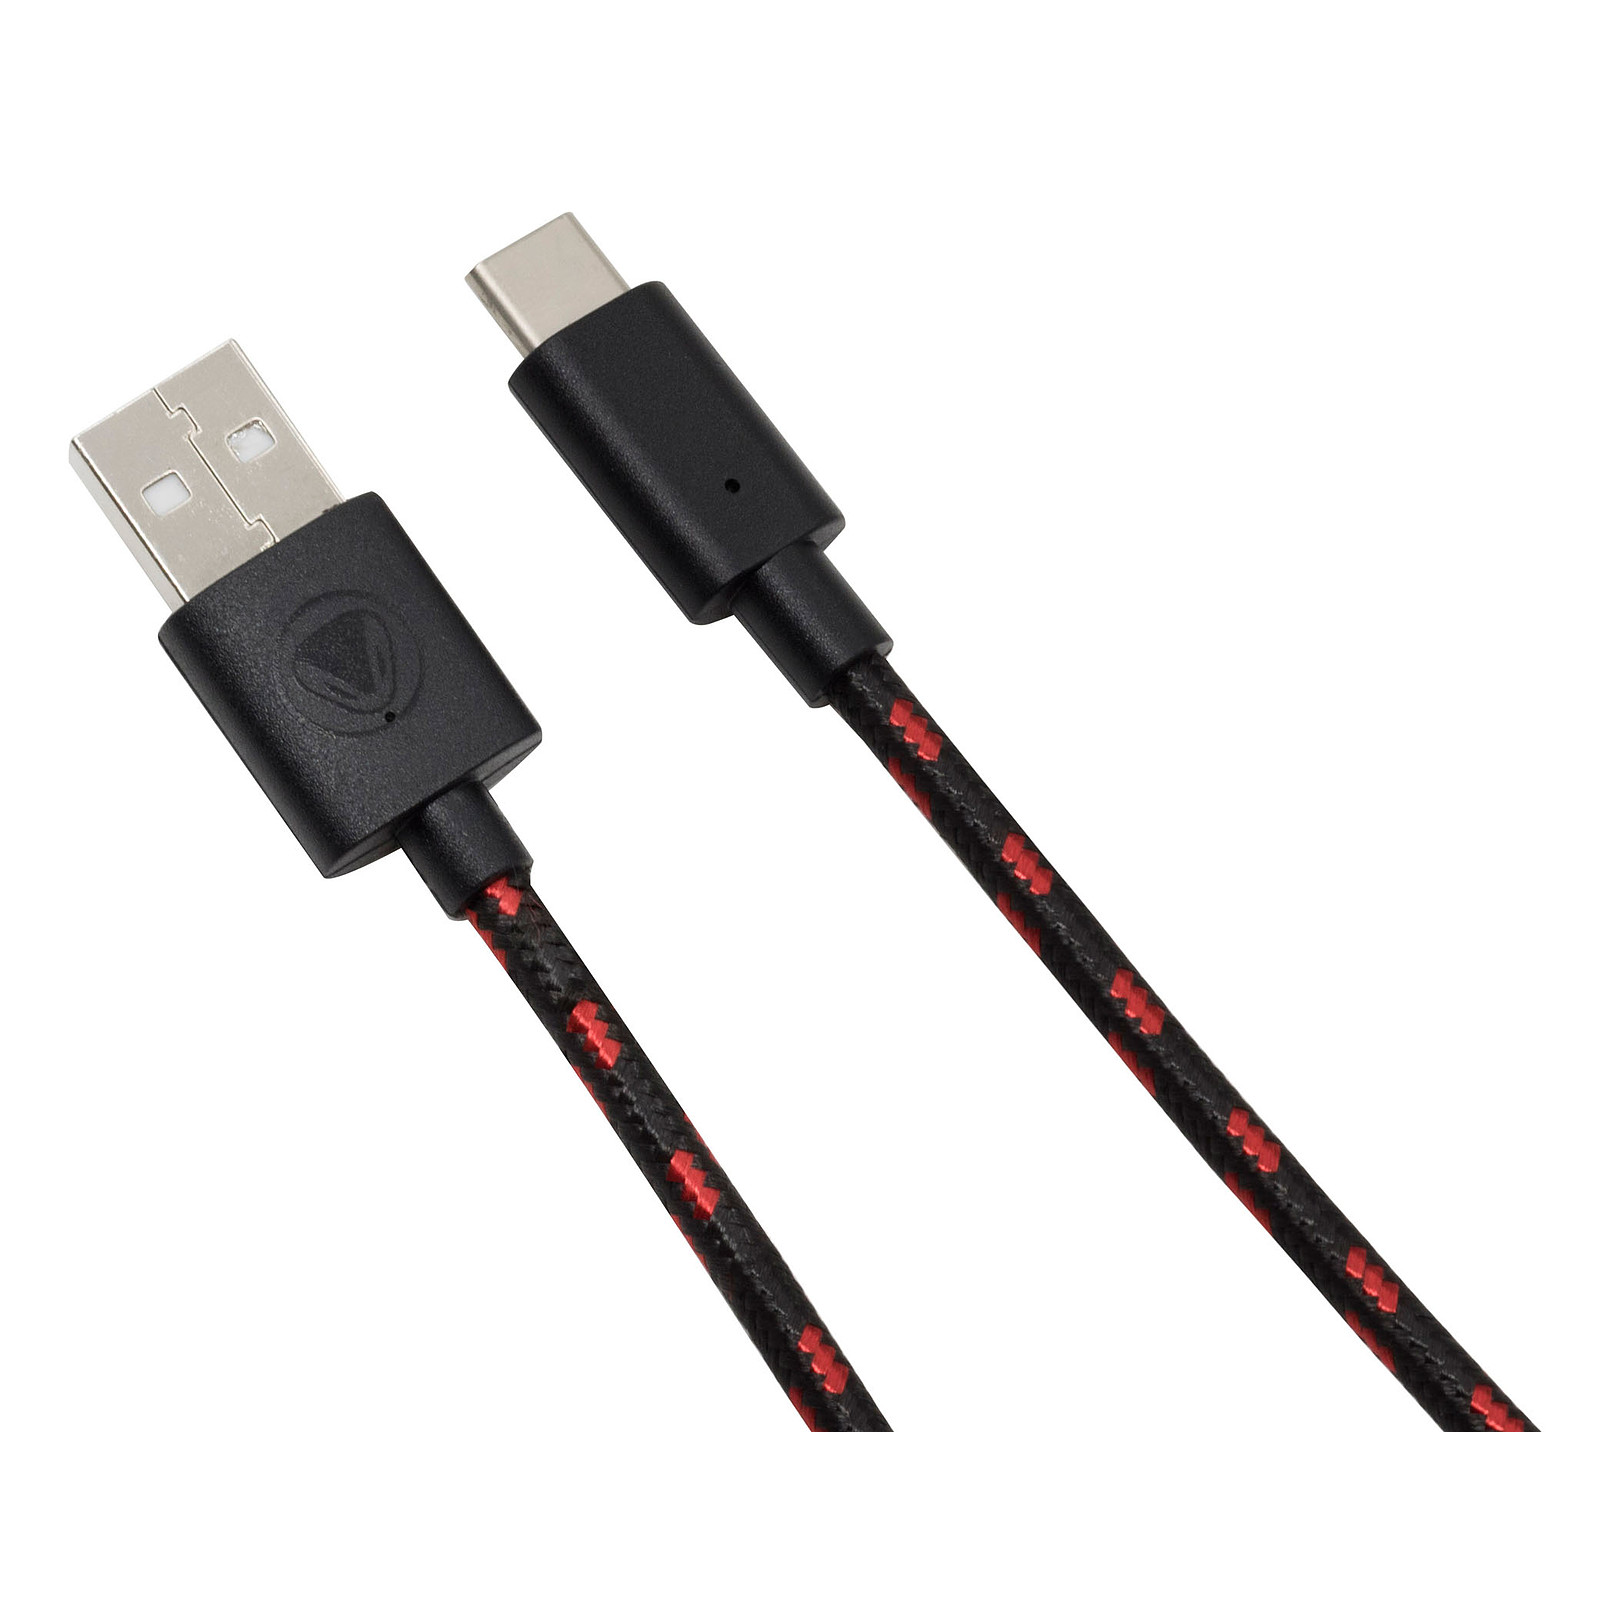 snakebyte - Cable de charge pour manette Nintendo Switch - Accessoires Switch Snakebyte